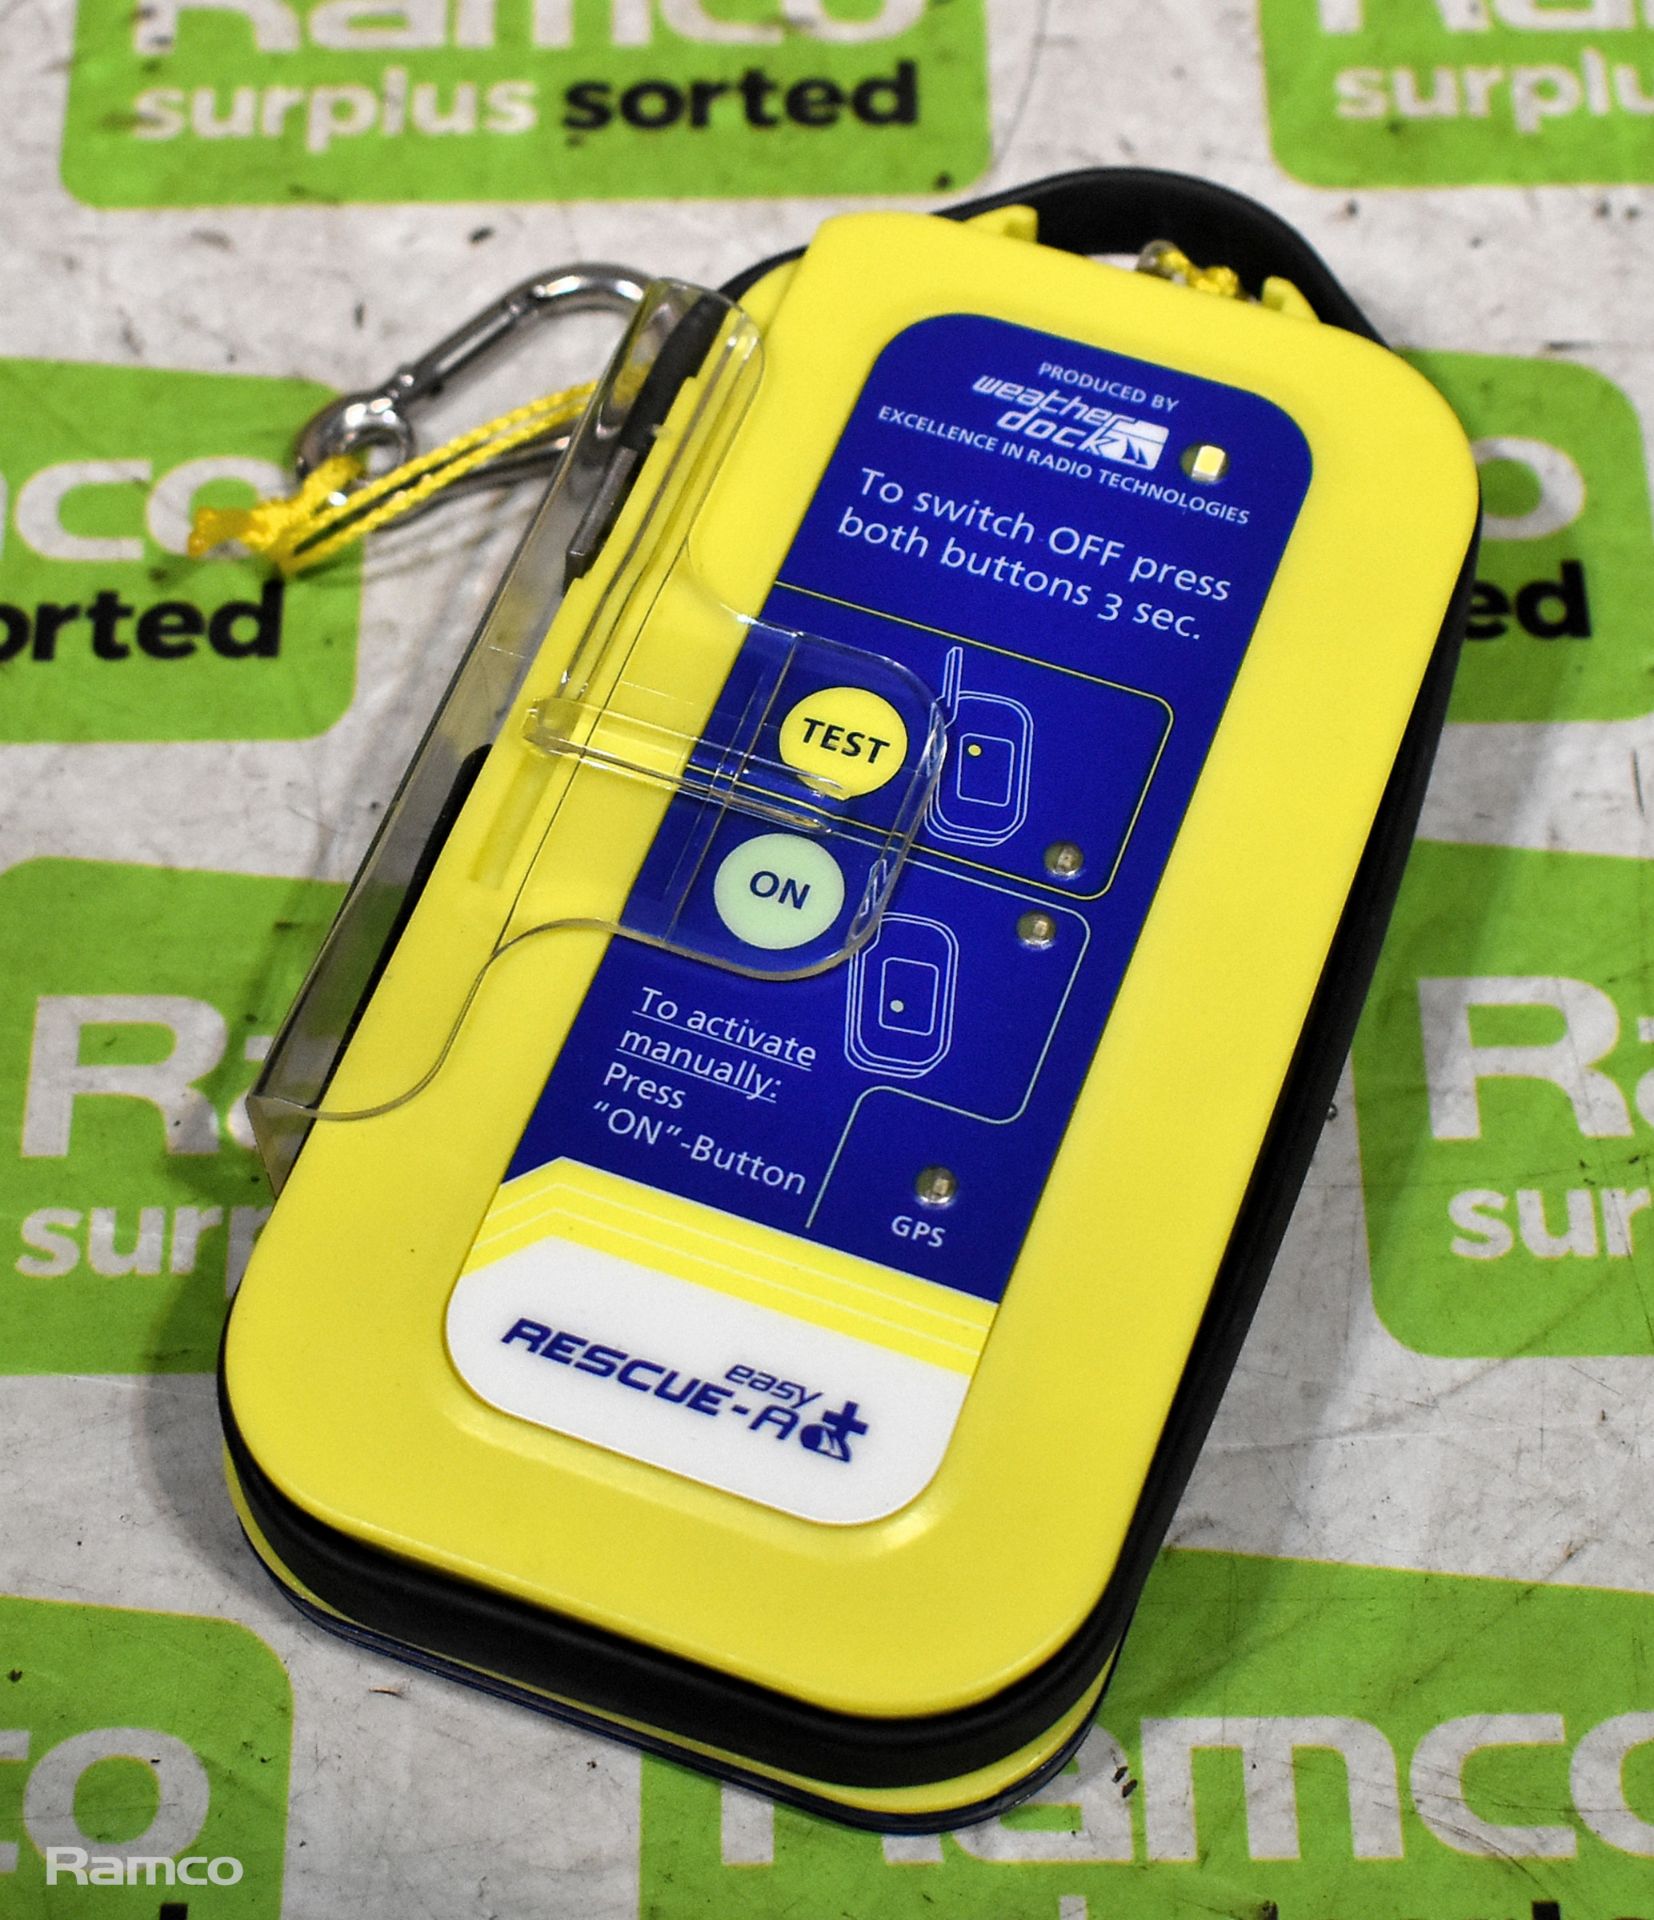 12x Weatherdock easy RESCUE-A+ personal locator beacons with belt clip and manual - Image 4 of 8